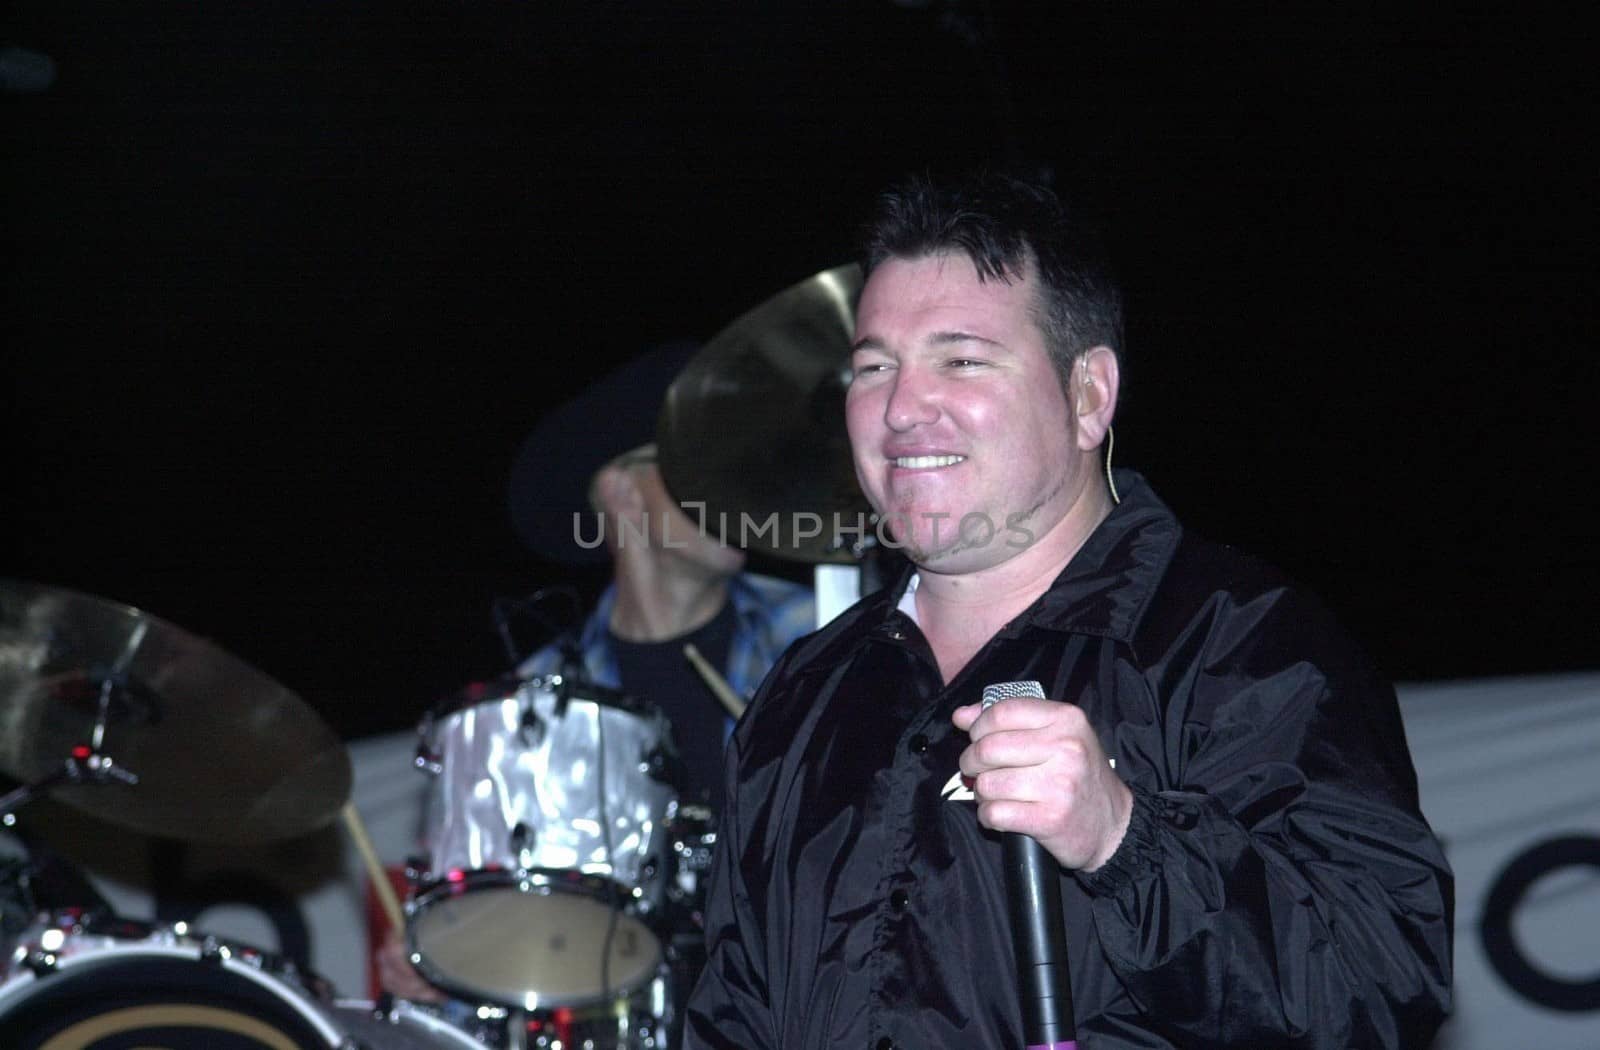 Smashmouth at the Swatch Wave Tour surf competition and rock concert at the Queen Mary in Long Beach, 02-02-00